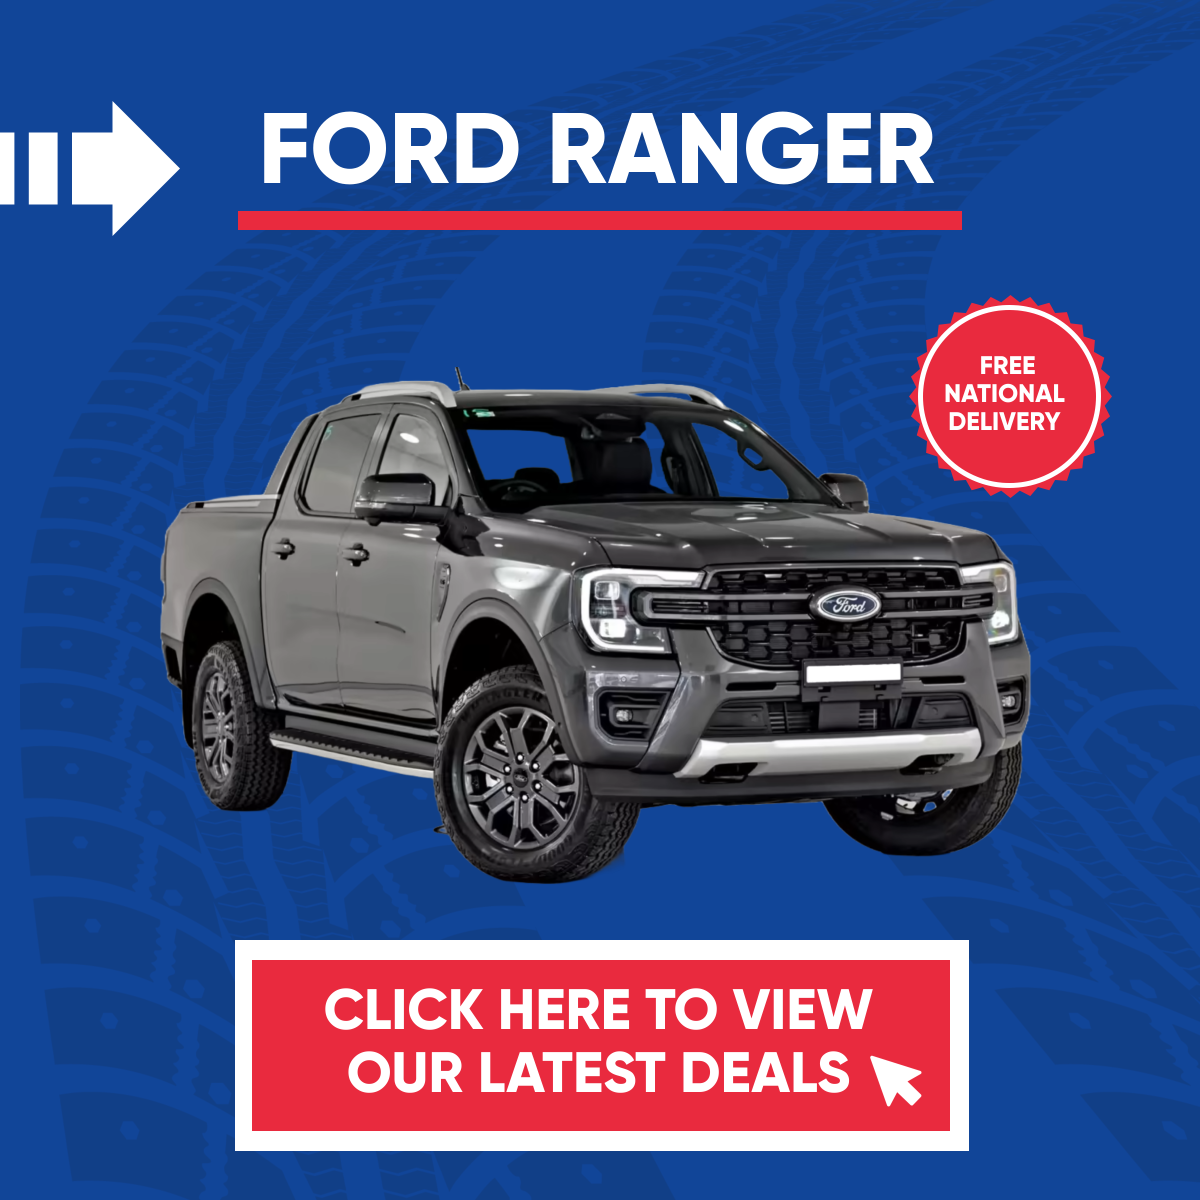 Buying Guide Pick Ups - Ford Ranger 